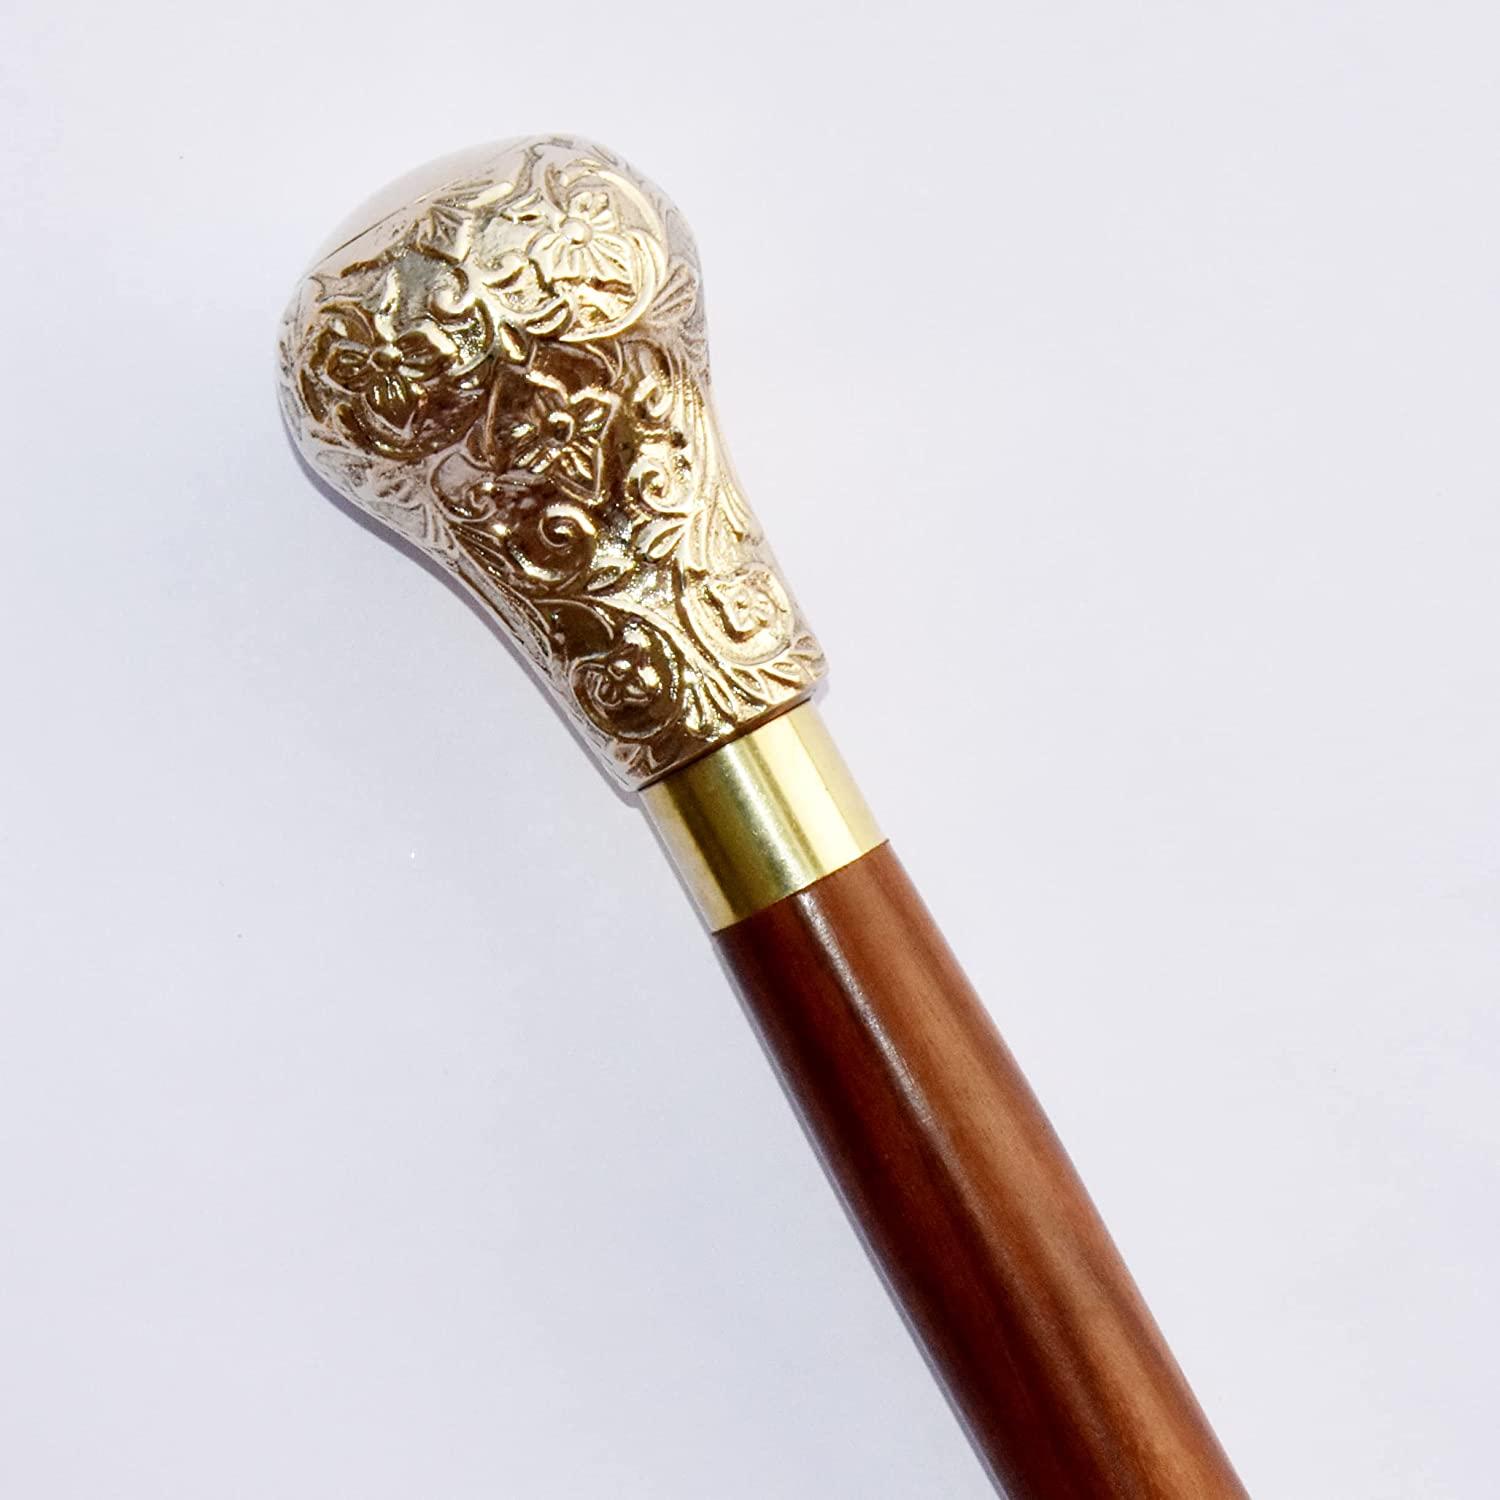 Medieval Replicas 37.4'' Canes and Walking Sticks in Natural Wood with a  Brass Handle - Elegant Walking Cane